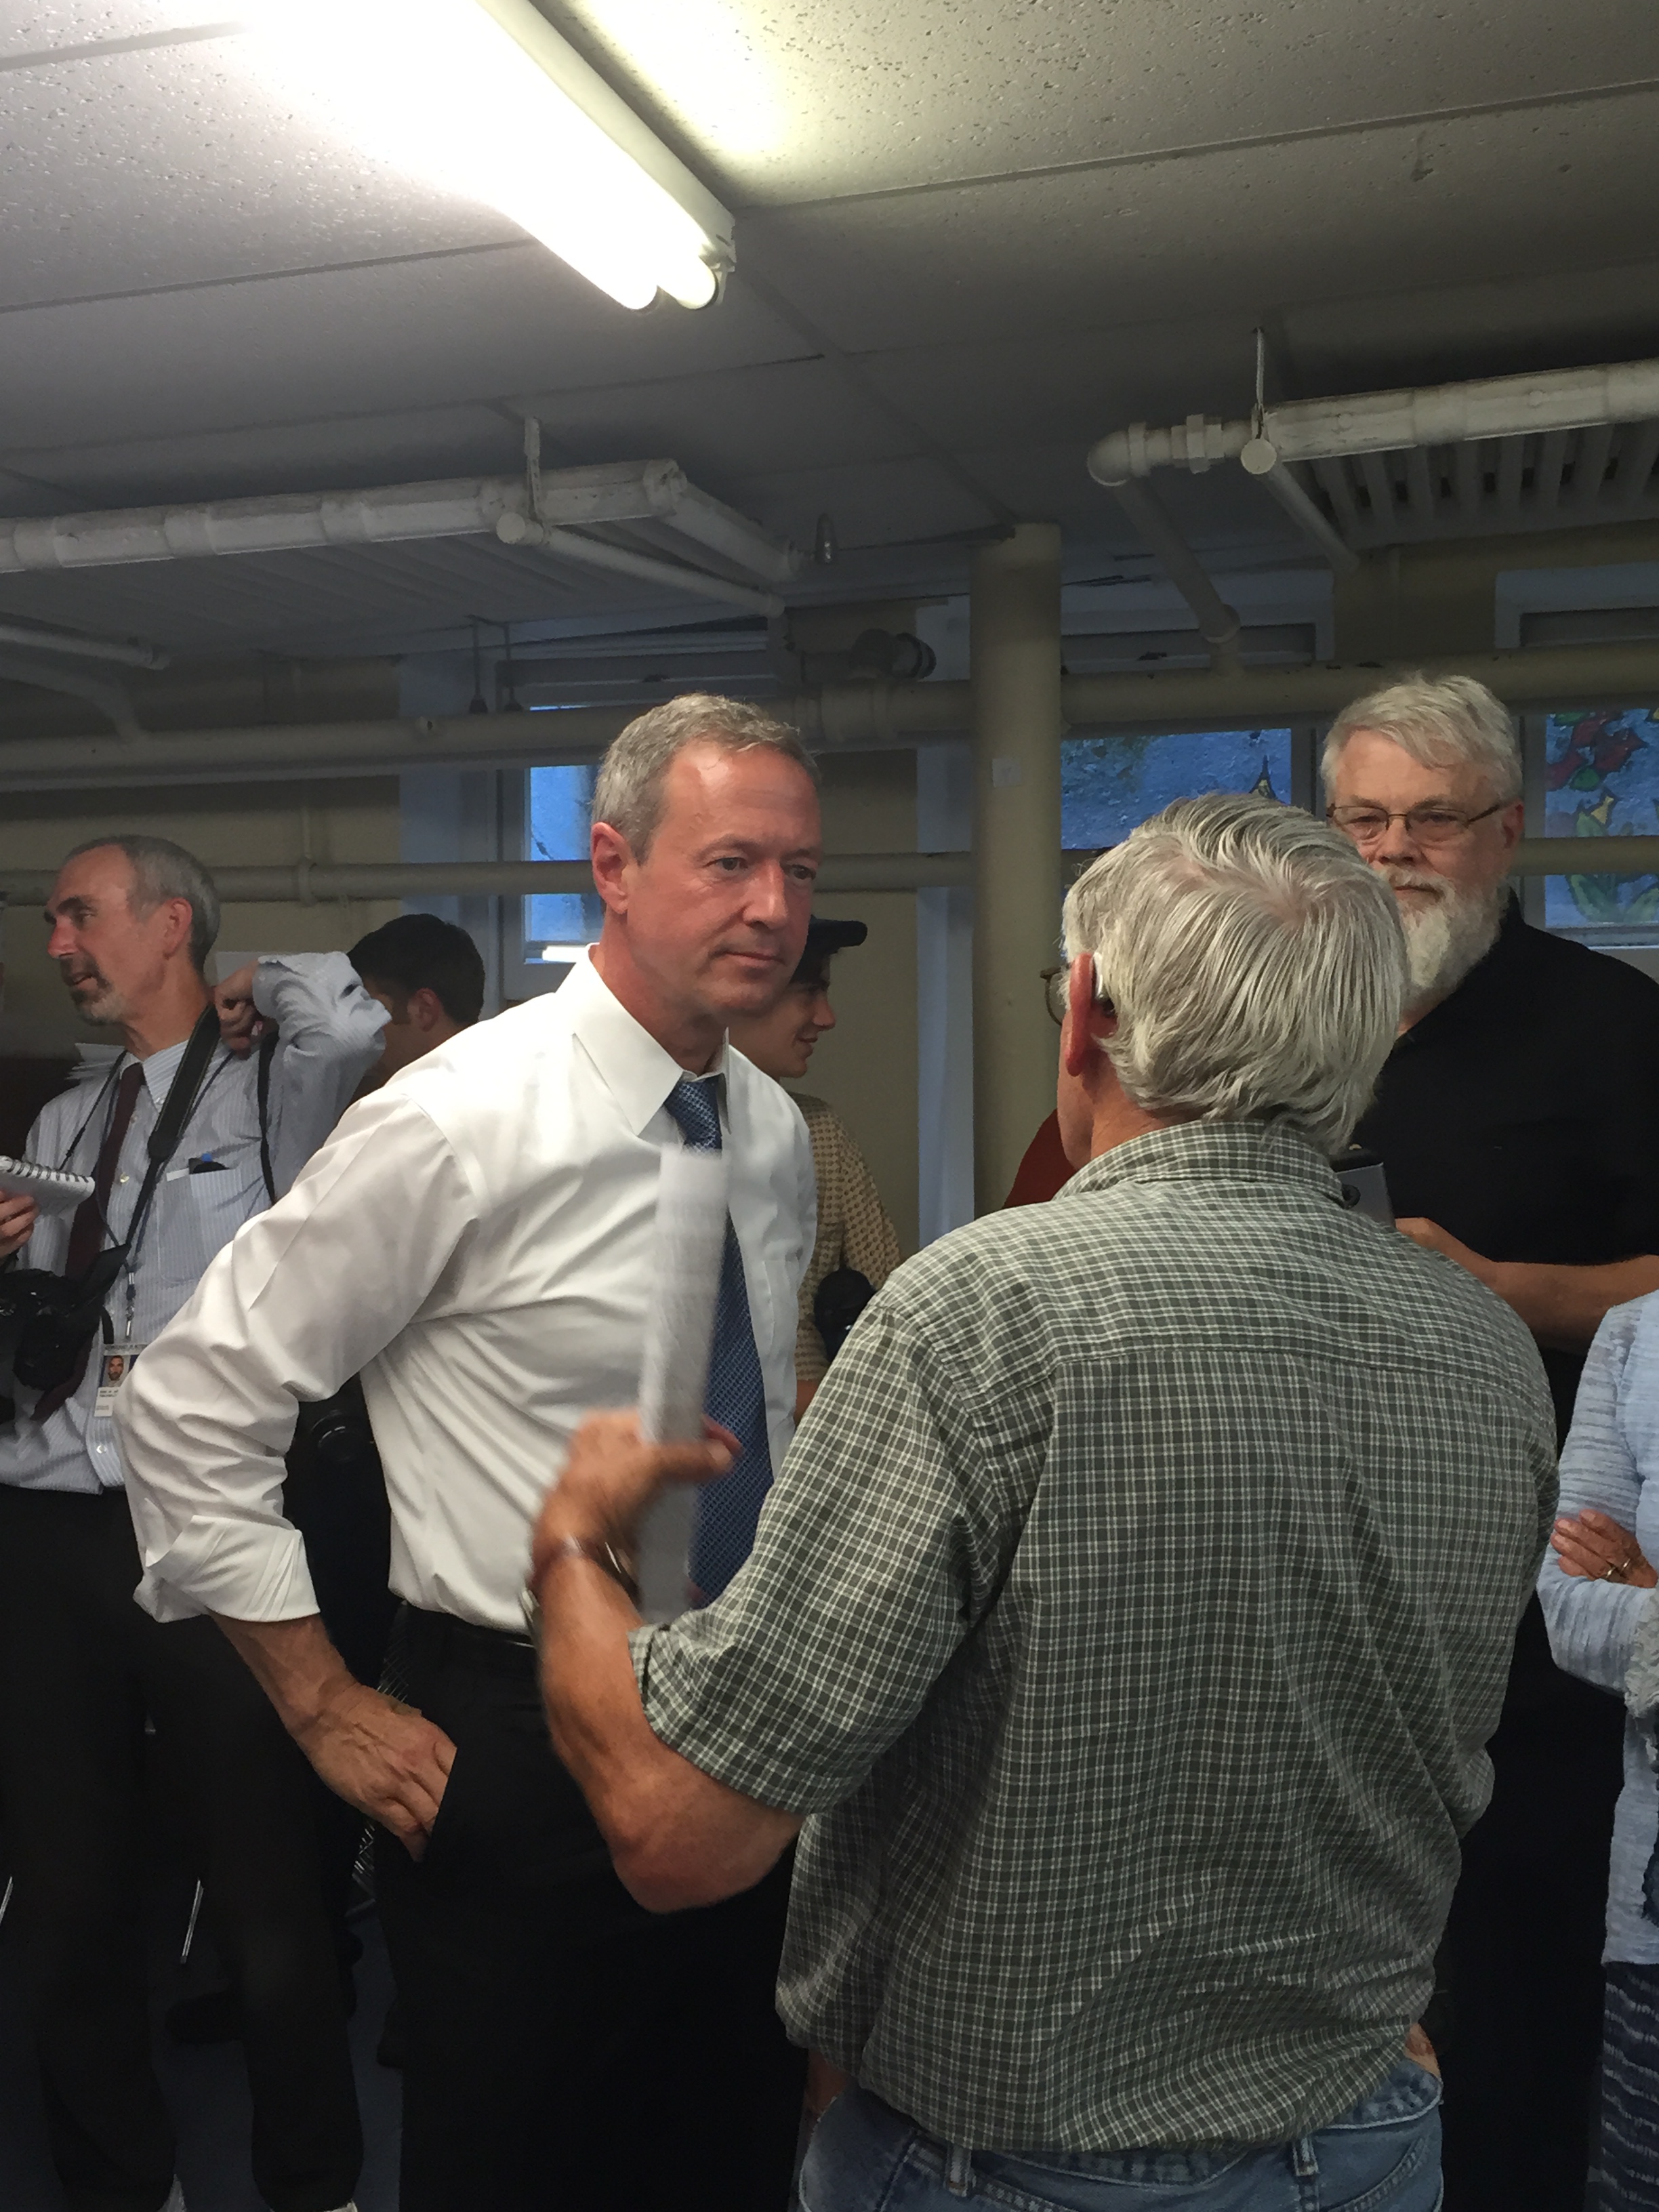 Martin O’Malley taking grassroots approach to campaign